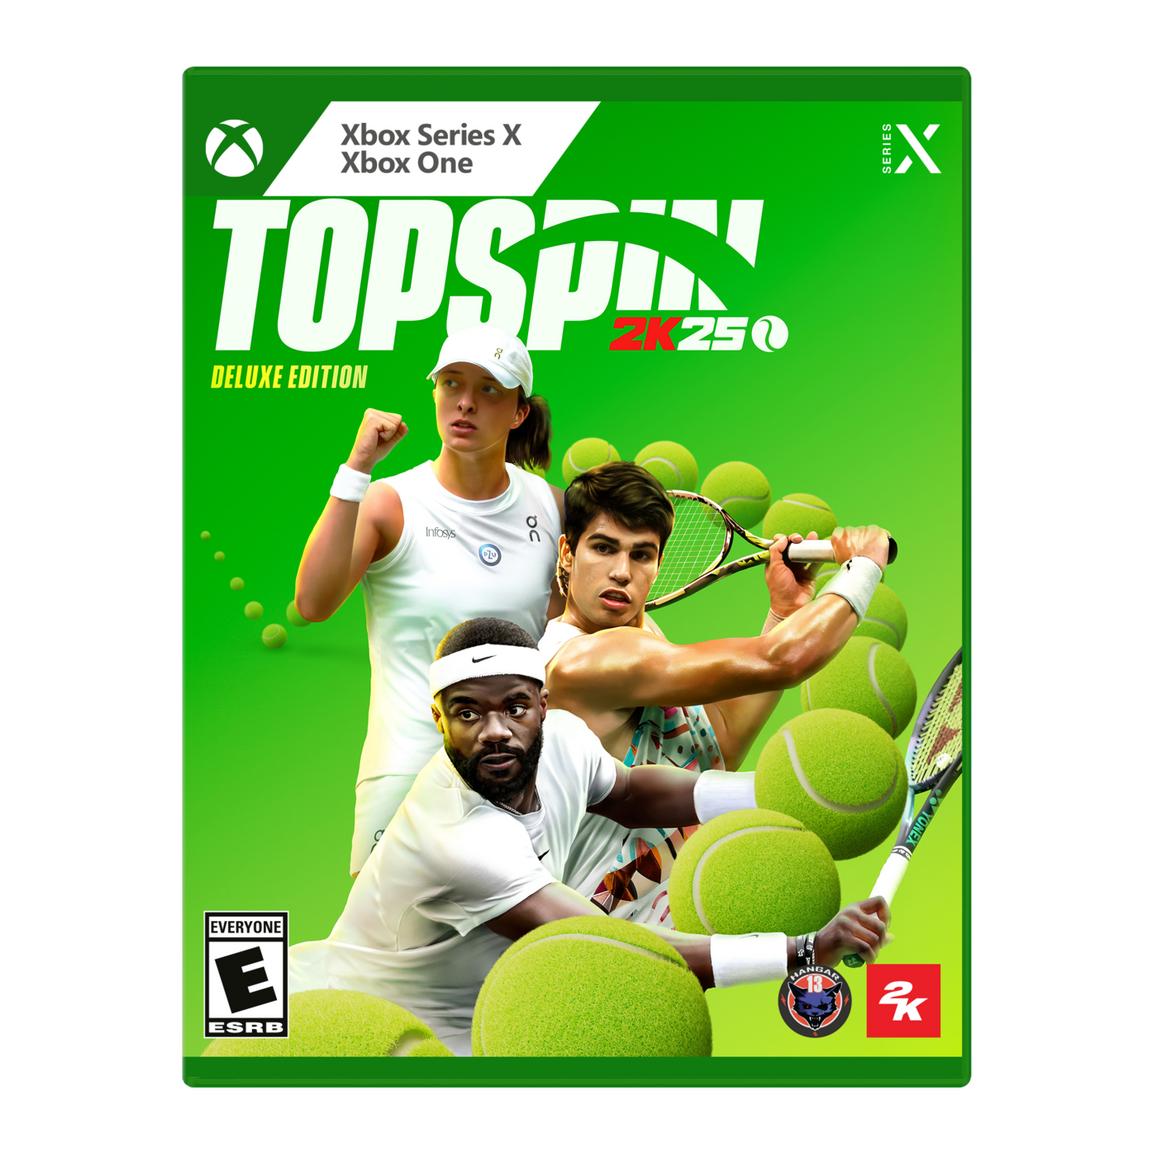 Видеоигра TopSpin 2K25 Deluxe Edition - Xbox Series X, Xbox One wolfenstein youngblood deluxe edition xbox one рус